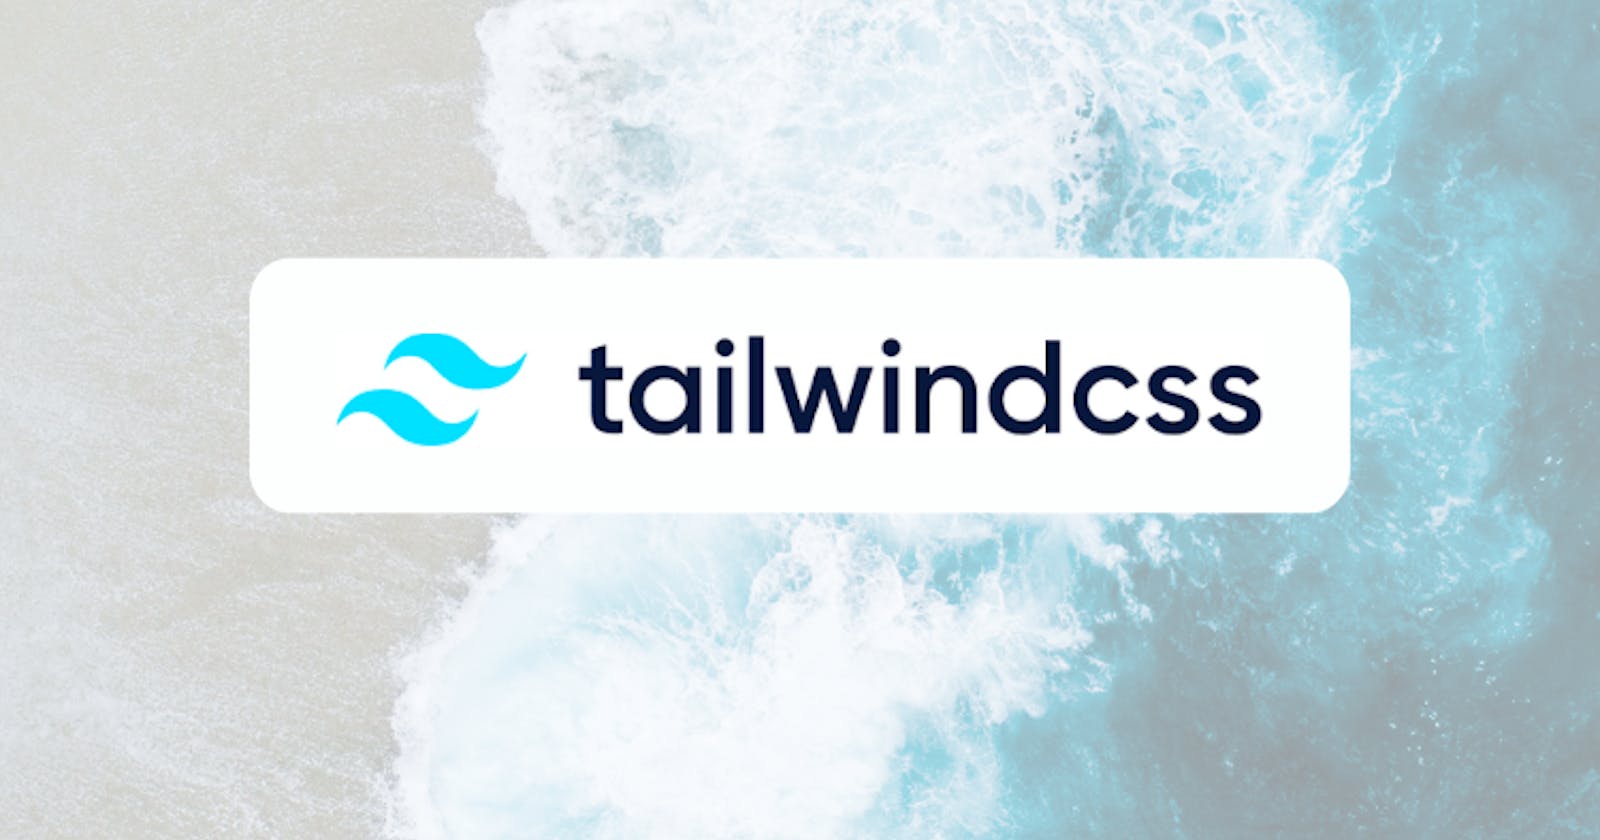 Use of borders with Tailwindcss